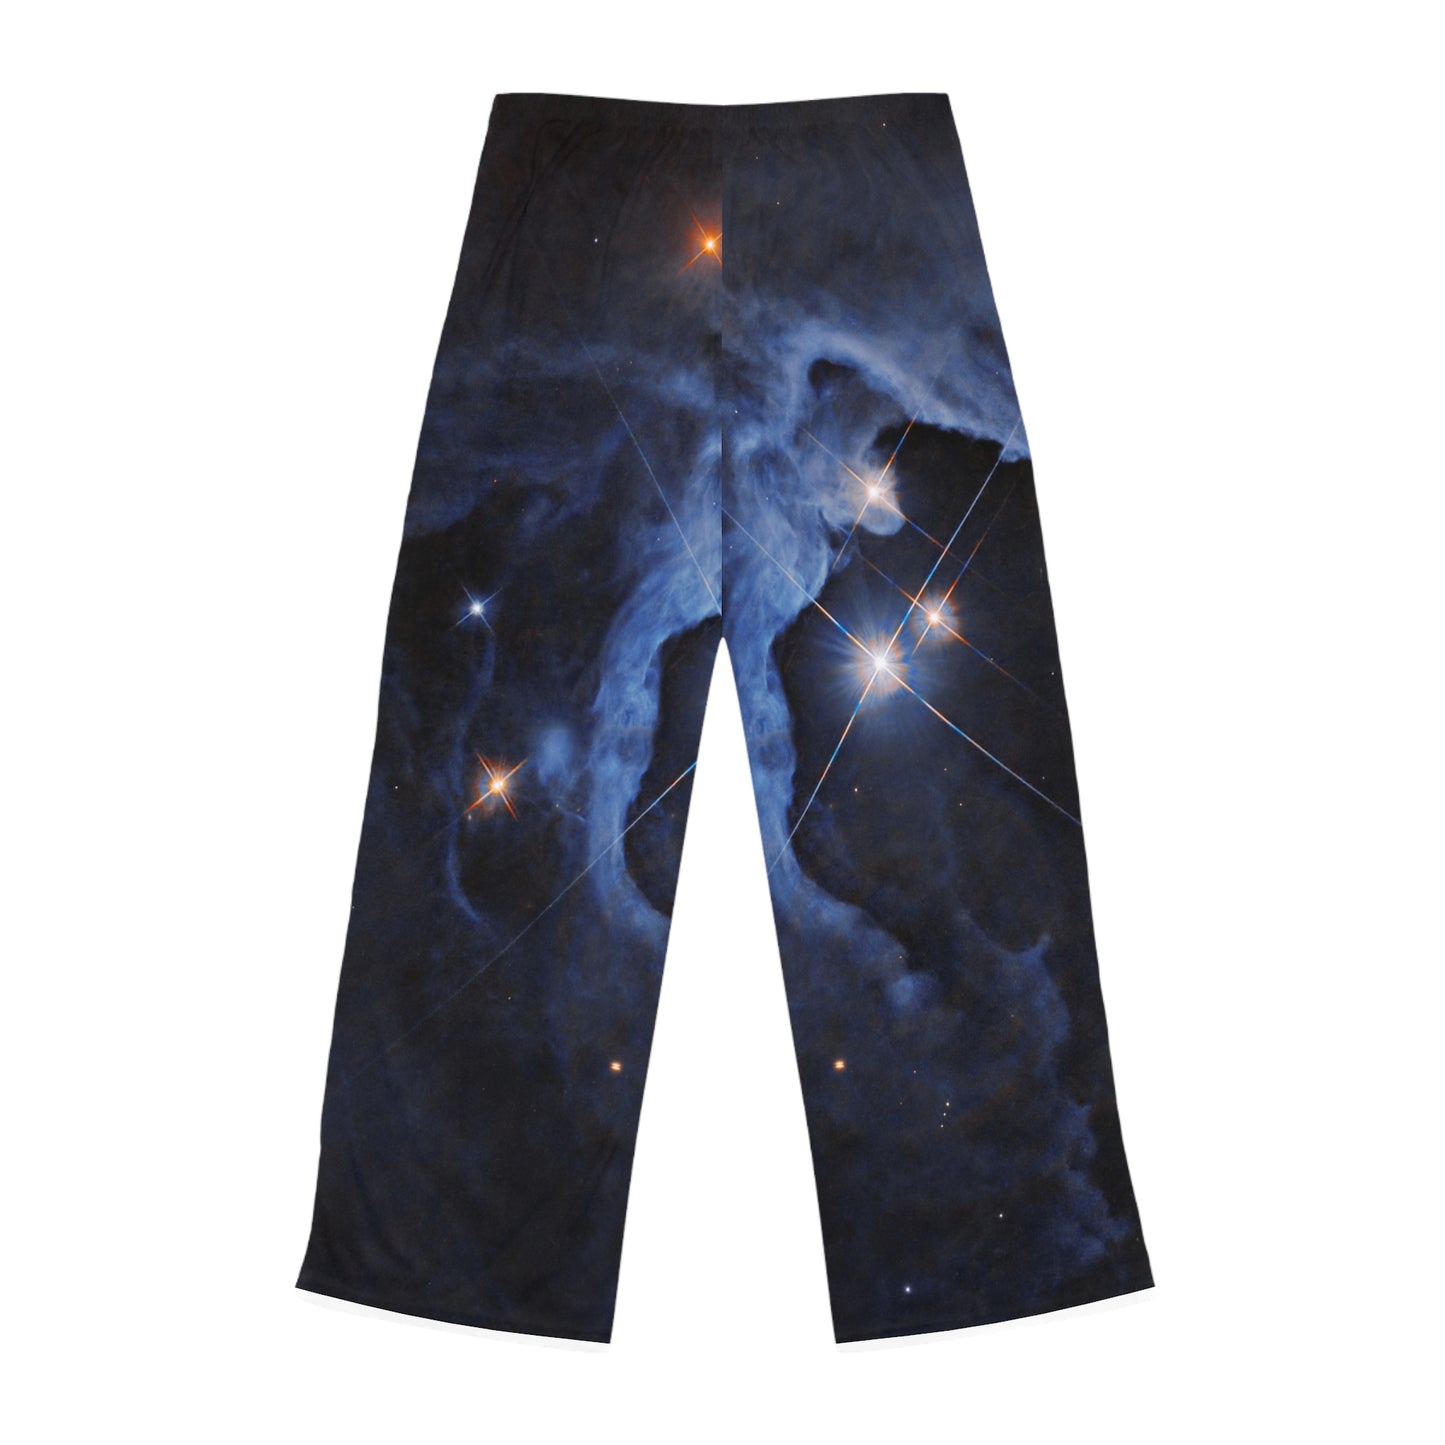 HP Tau, HP Tau G2, and G3 3 star system captured by Hubble - Women lounge pants